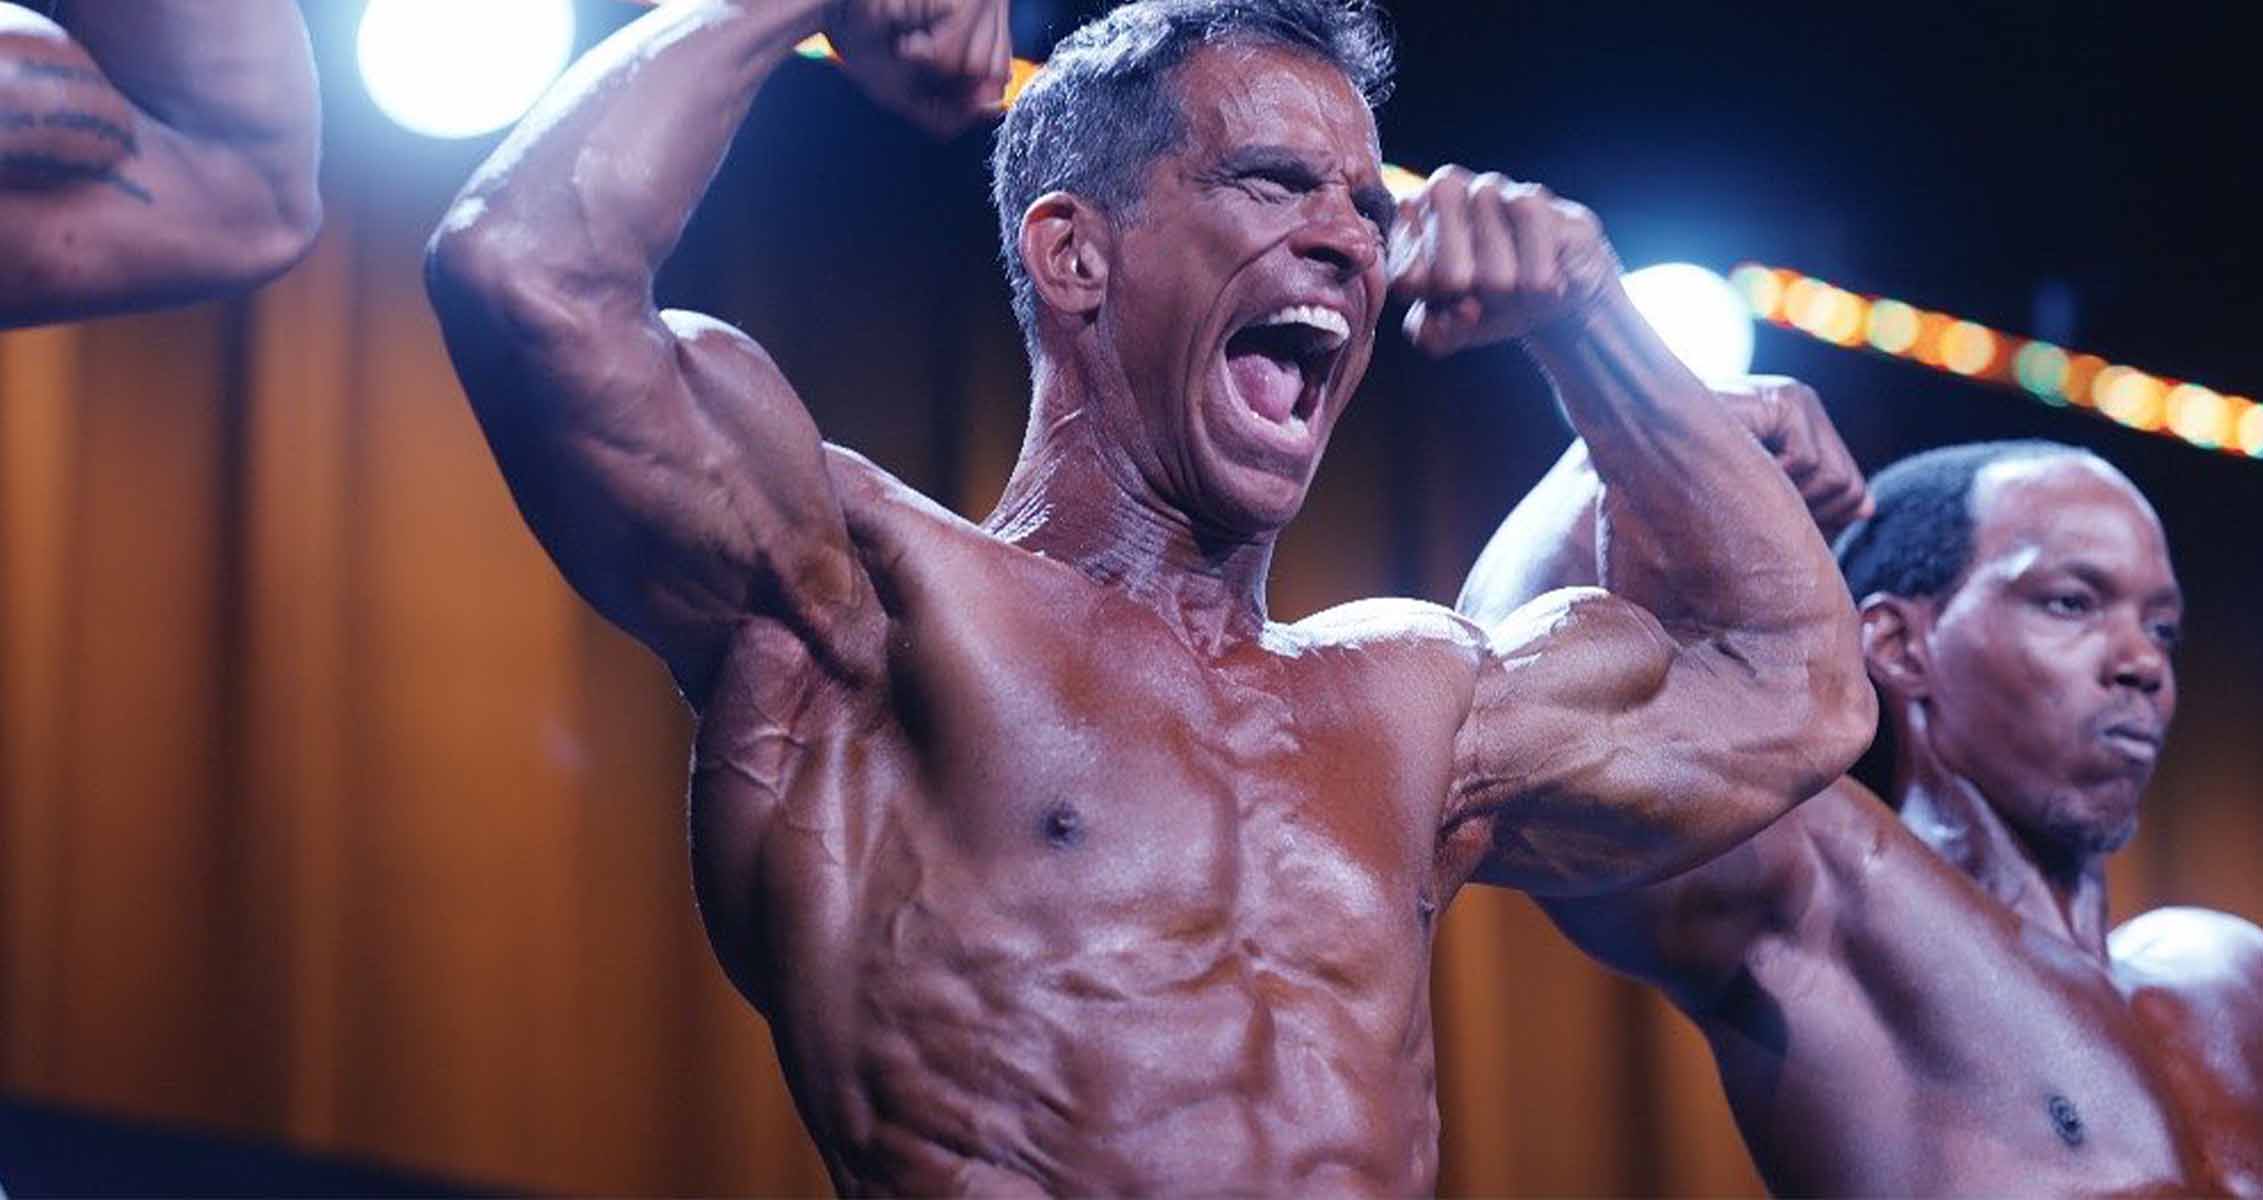 Johnathon Schaechs Journey From Addiction, To Actor, To Bodybuilding Champion At 53 The Mike OHearn Show